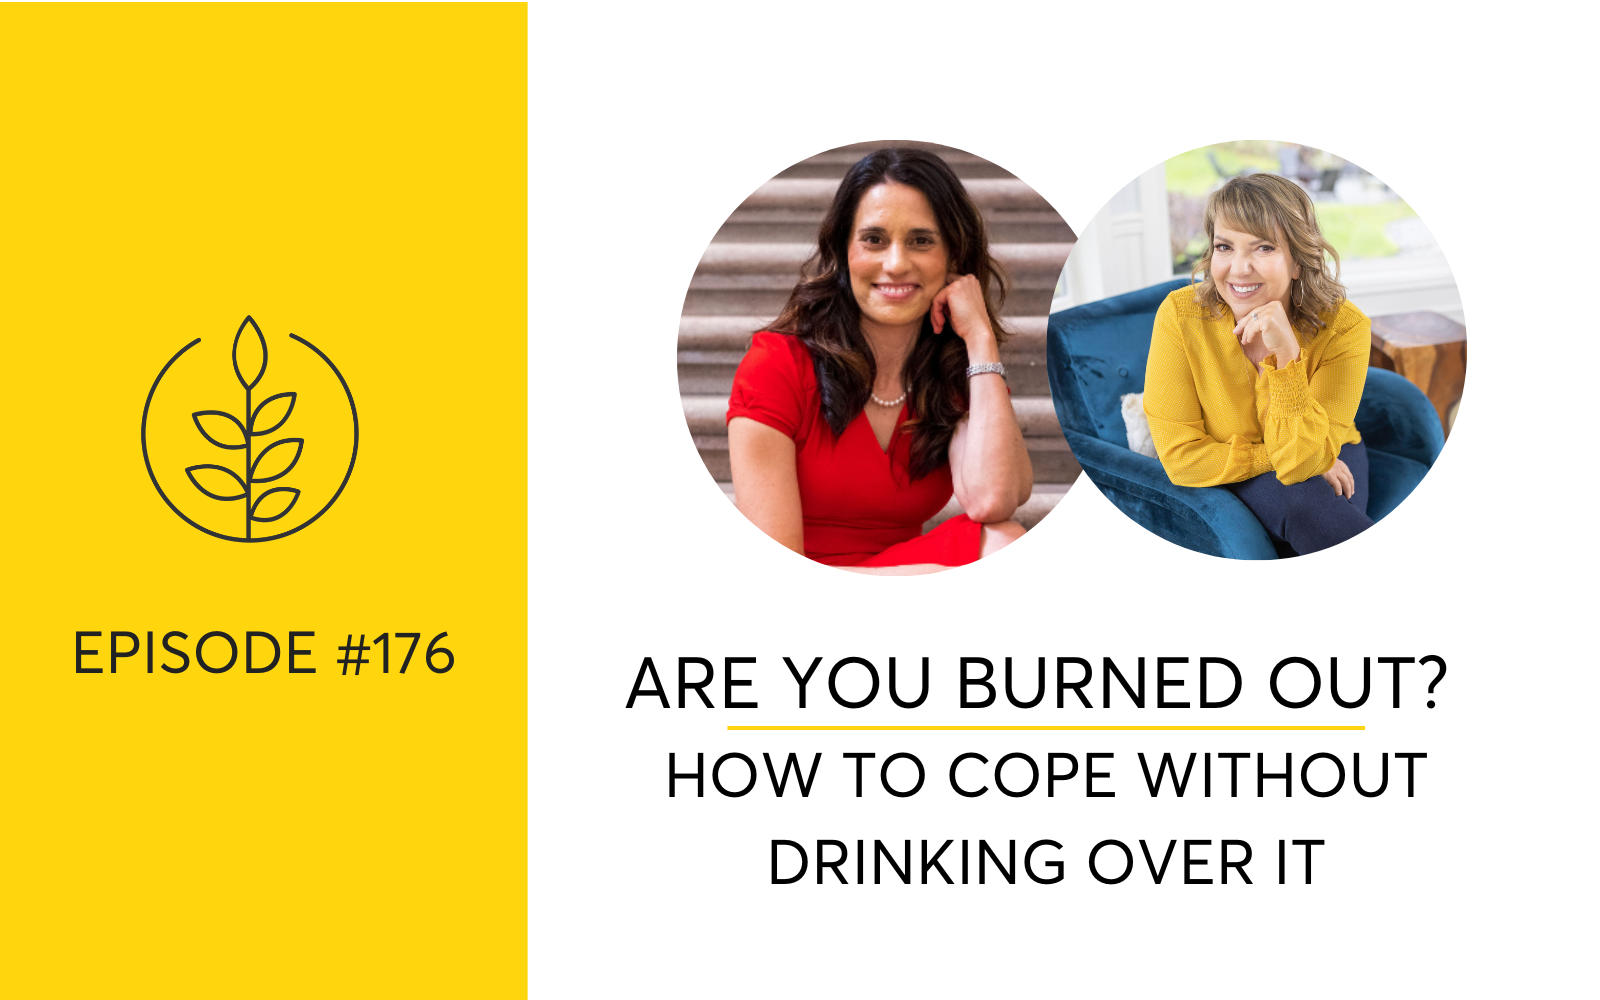 Are You Burned Out? How To Cope Without Drinking Over It